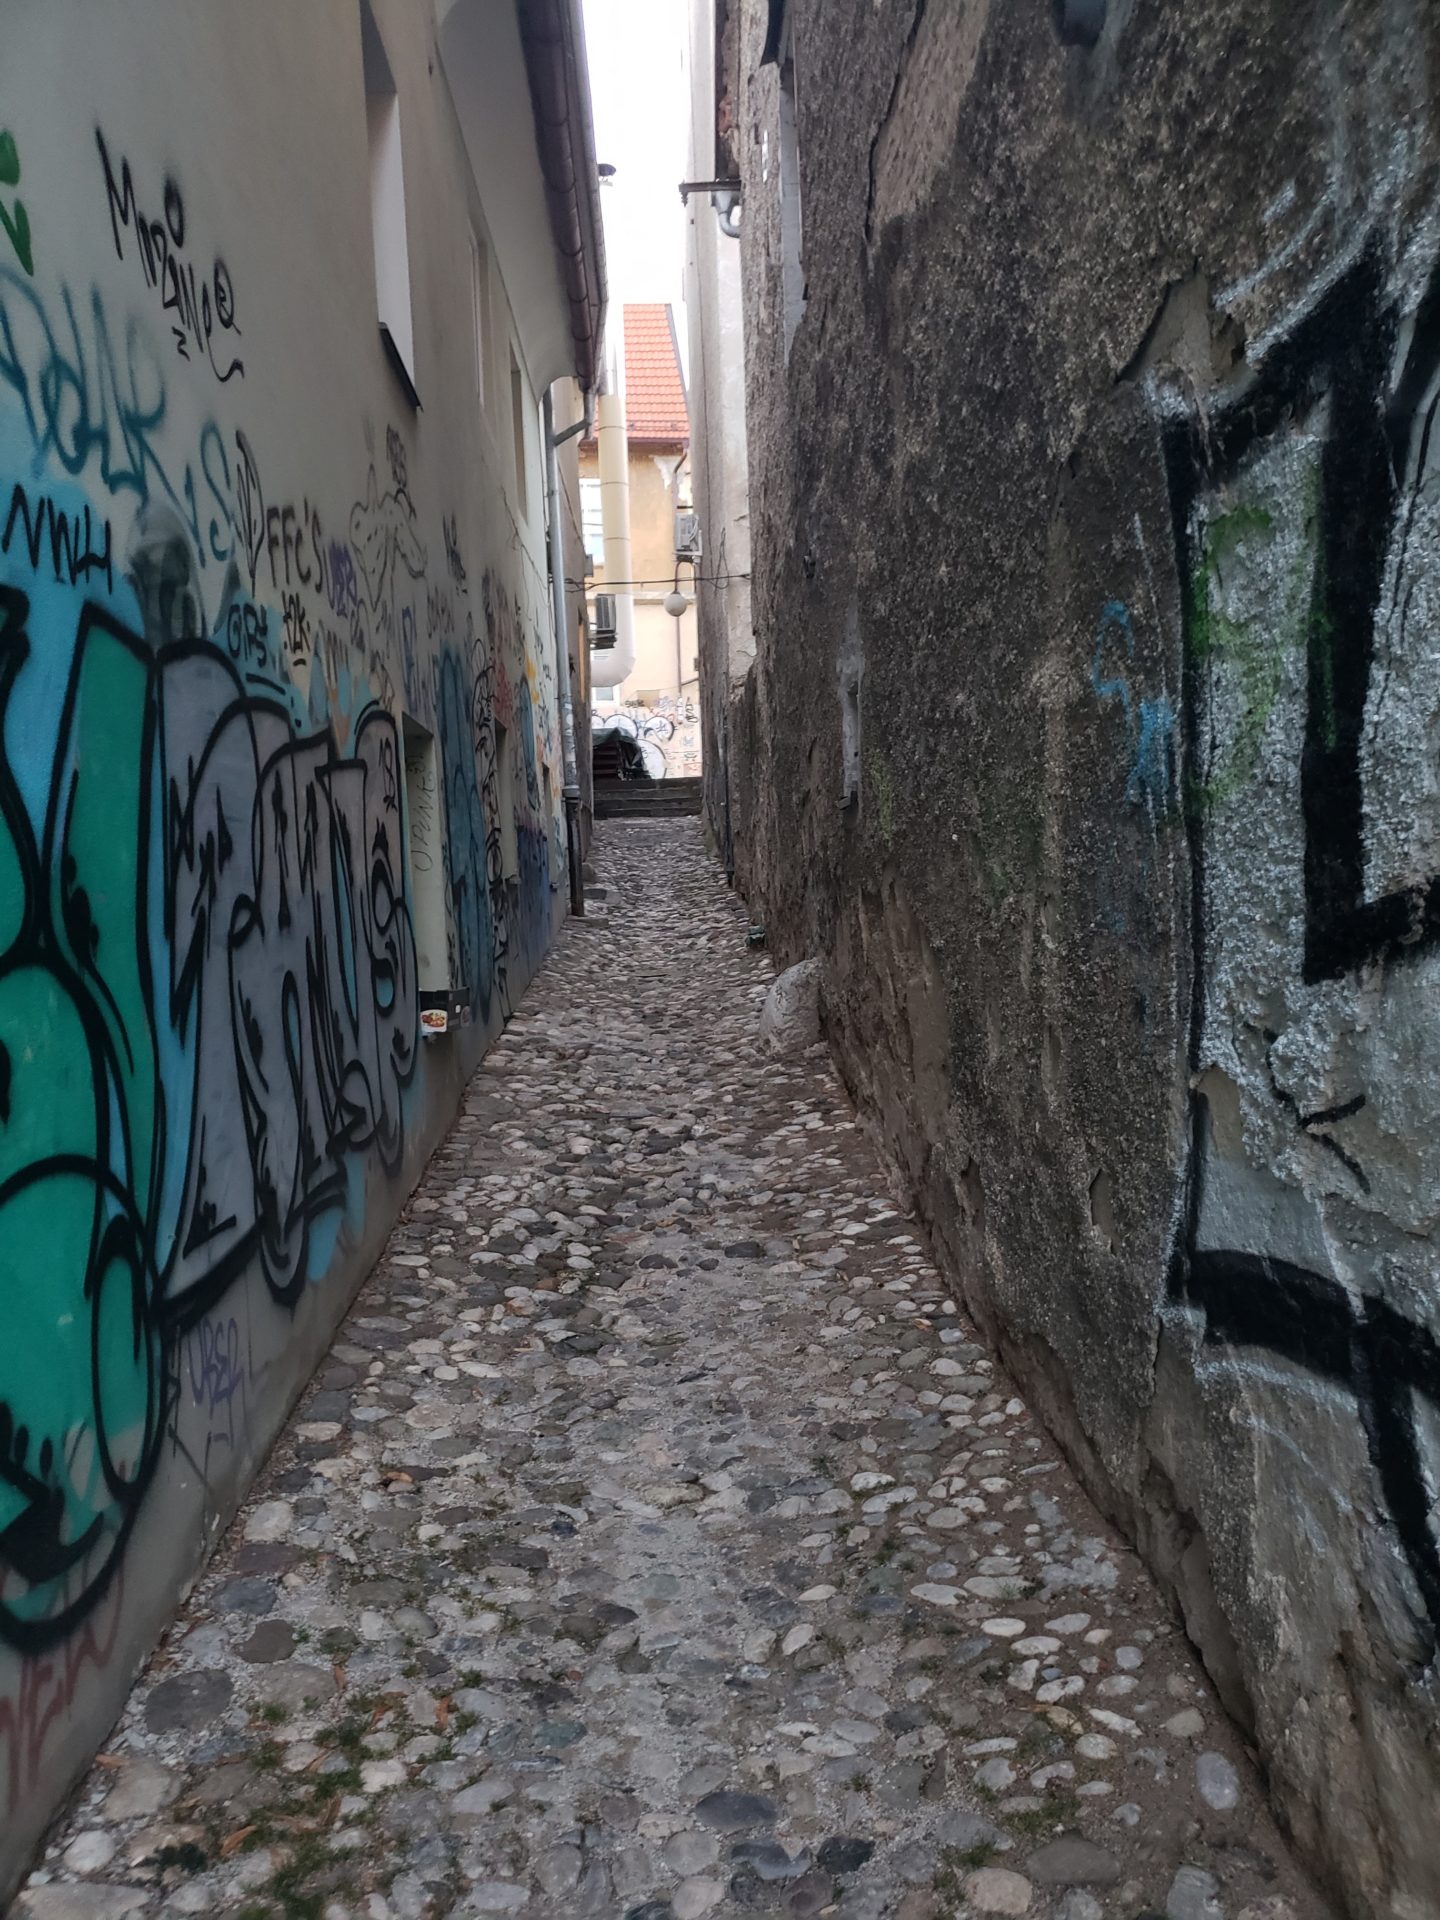 a narrow alleyway with graffiti on the walls